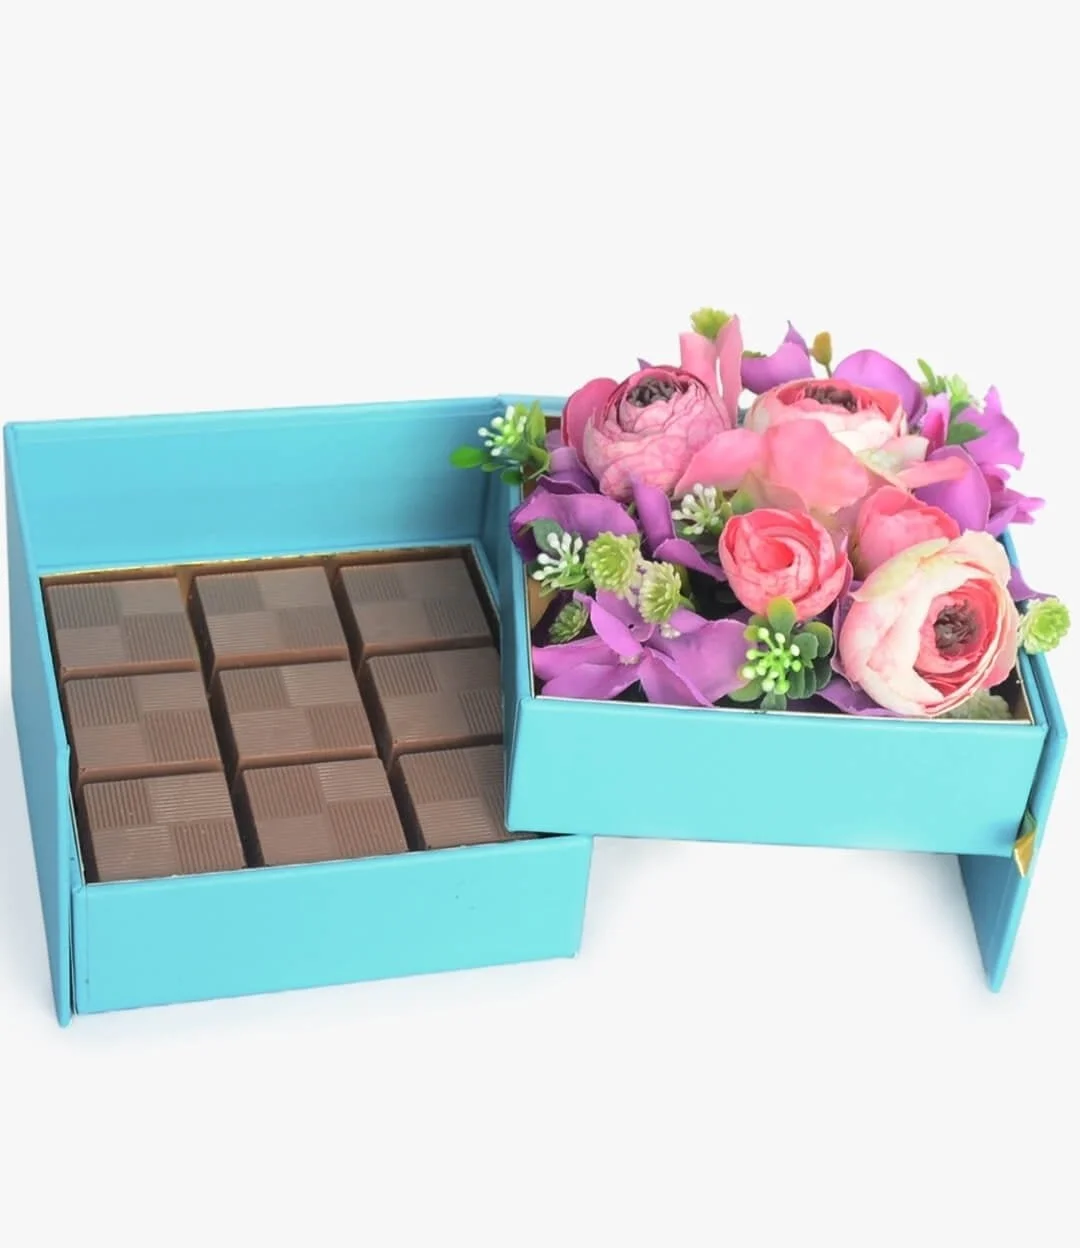 Roses and Chocolate Small Box by NJD 